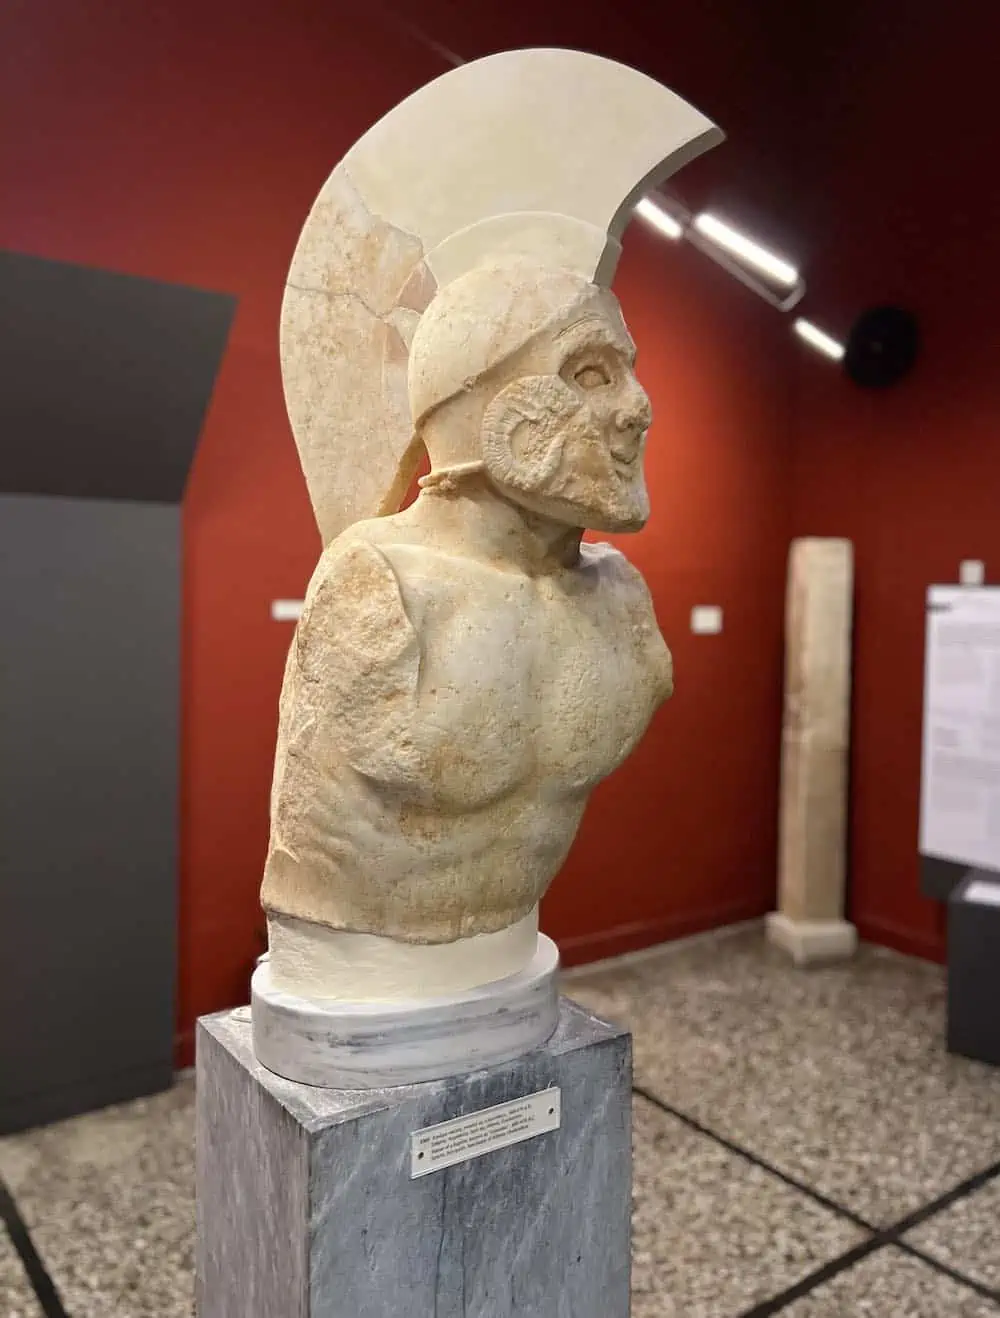 Bust said to be of Leonidas.